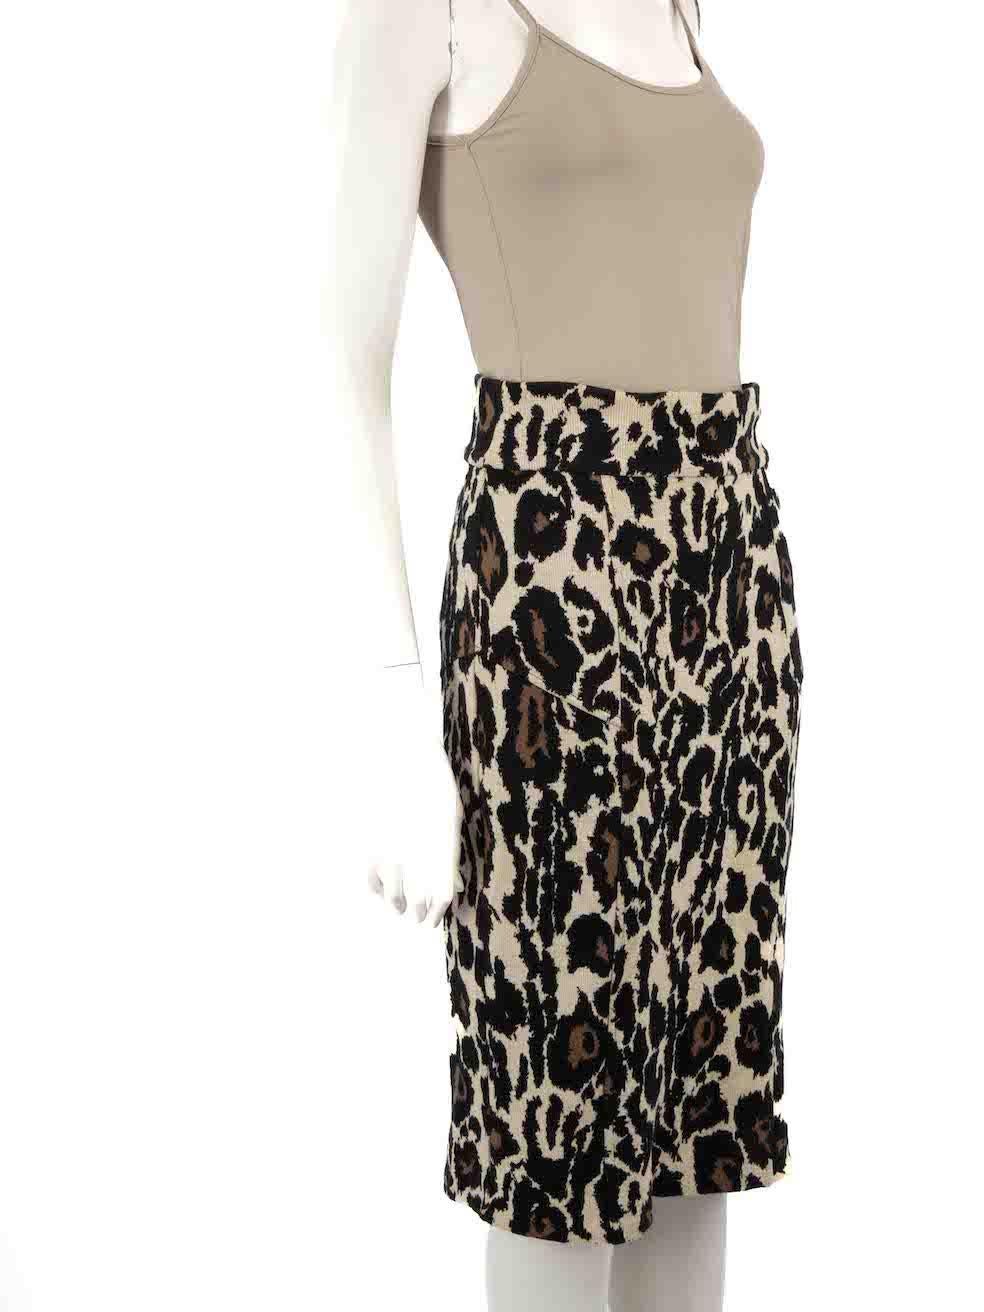 CONDITION is Good. Minor wear to skirt is evident. Light wear to the knit composition with mild pilling seen throughout on this used Diane von Furstenberg designer resale item.
 
 Details
 Brown
 Cotton
 Pencil skirt
 Leopard print
 Midi
 Side zip